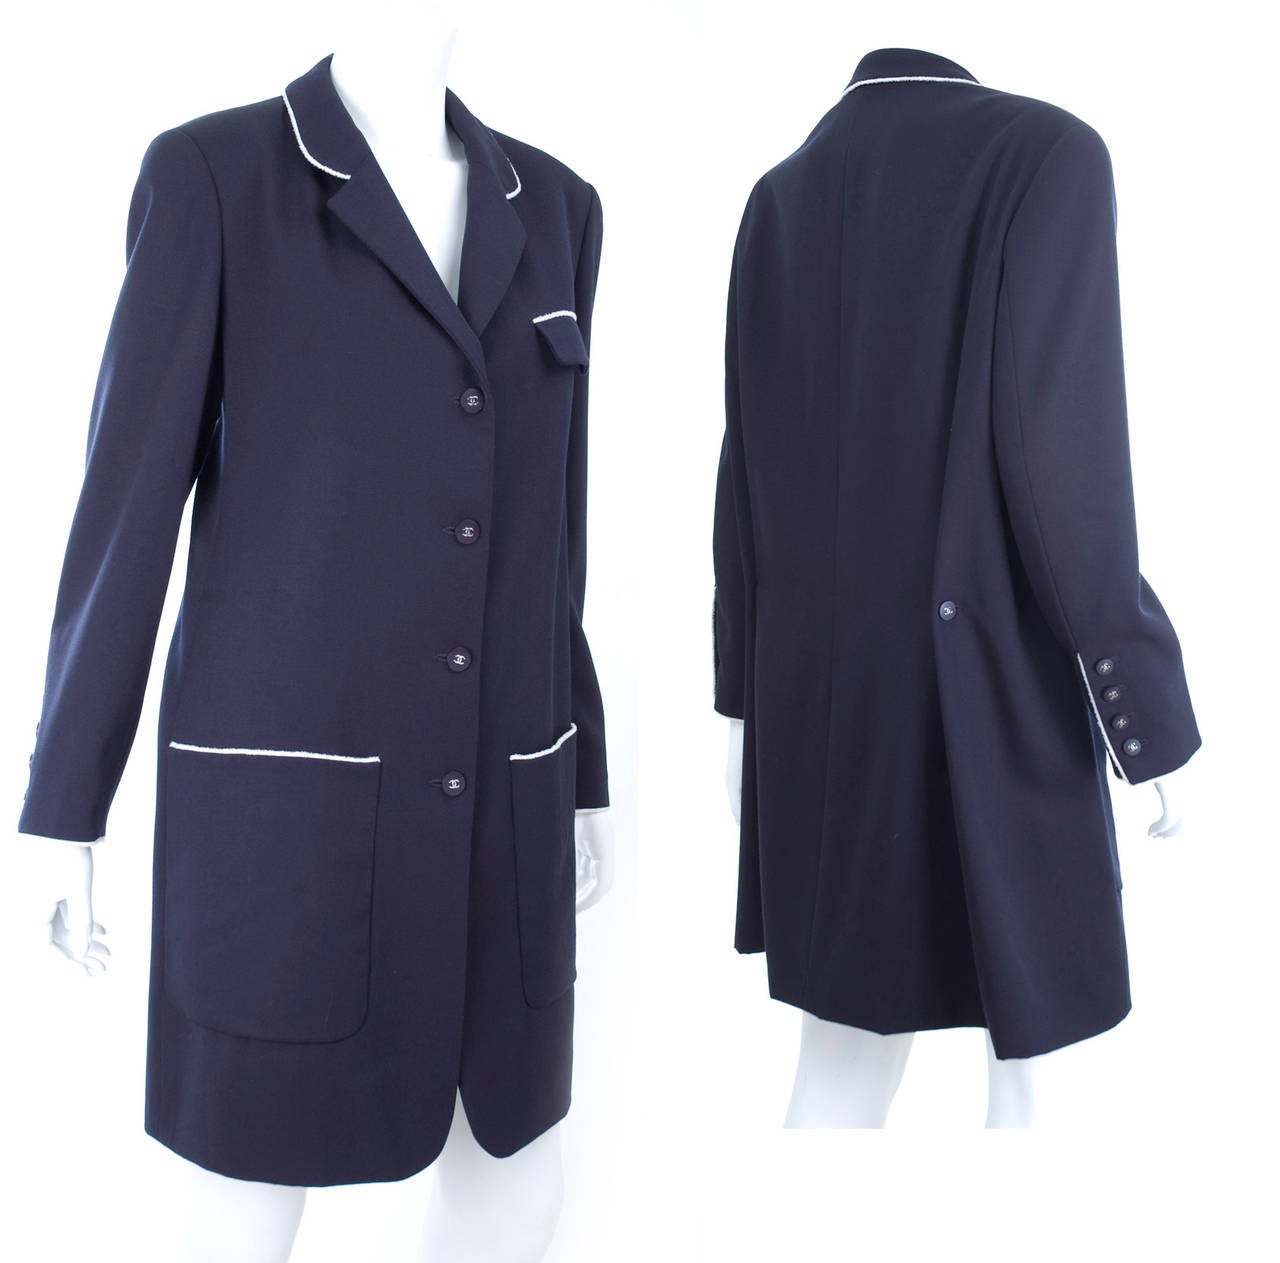 1996 Chanel Long Navy Jacket or Coat. The Buttons with silver CC Logo.
Size 48 EU 
Excellent condition - Dry cleaned.
Virgin wool and silk lining with the CC logo

Measurements:
Length 38